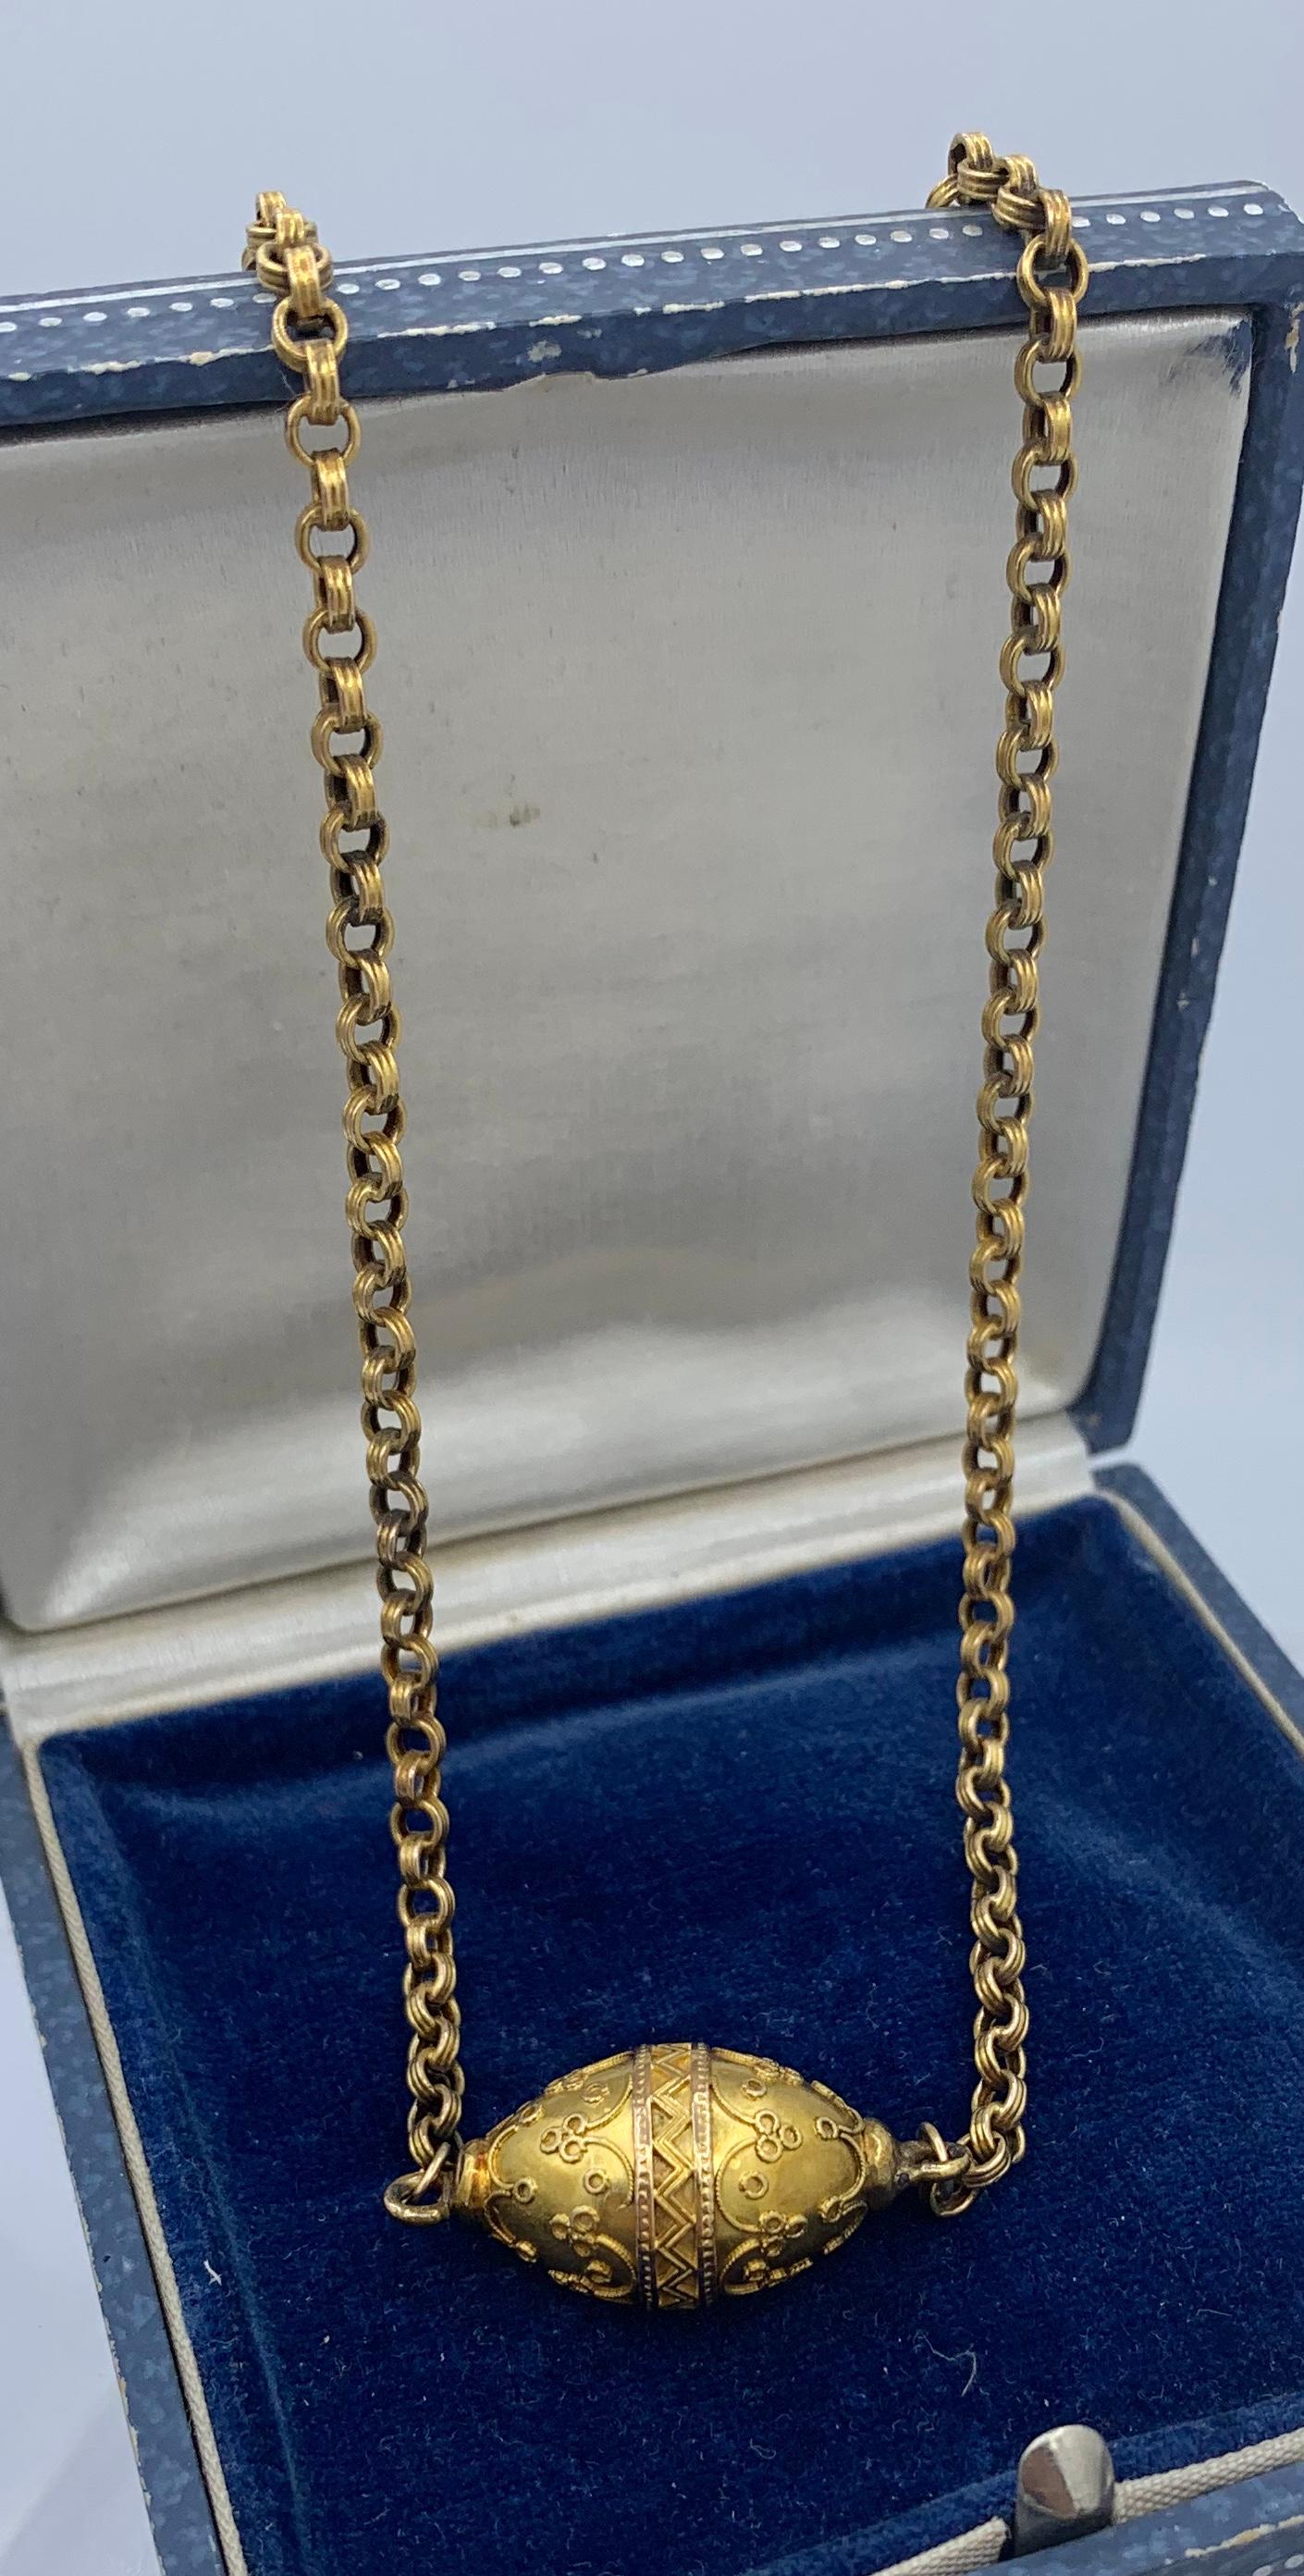 This is a gorgeous and very rare original Antique 14 Karat Gold Etruscan Revival Victorian - Belle Epoque Necklace of great beauty.  The necklace is 18 inches long.  The Etruscan jewels are characterized by exquisite micro beading and hand applied